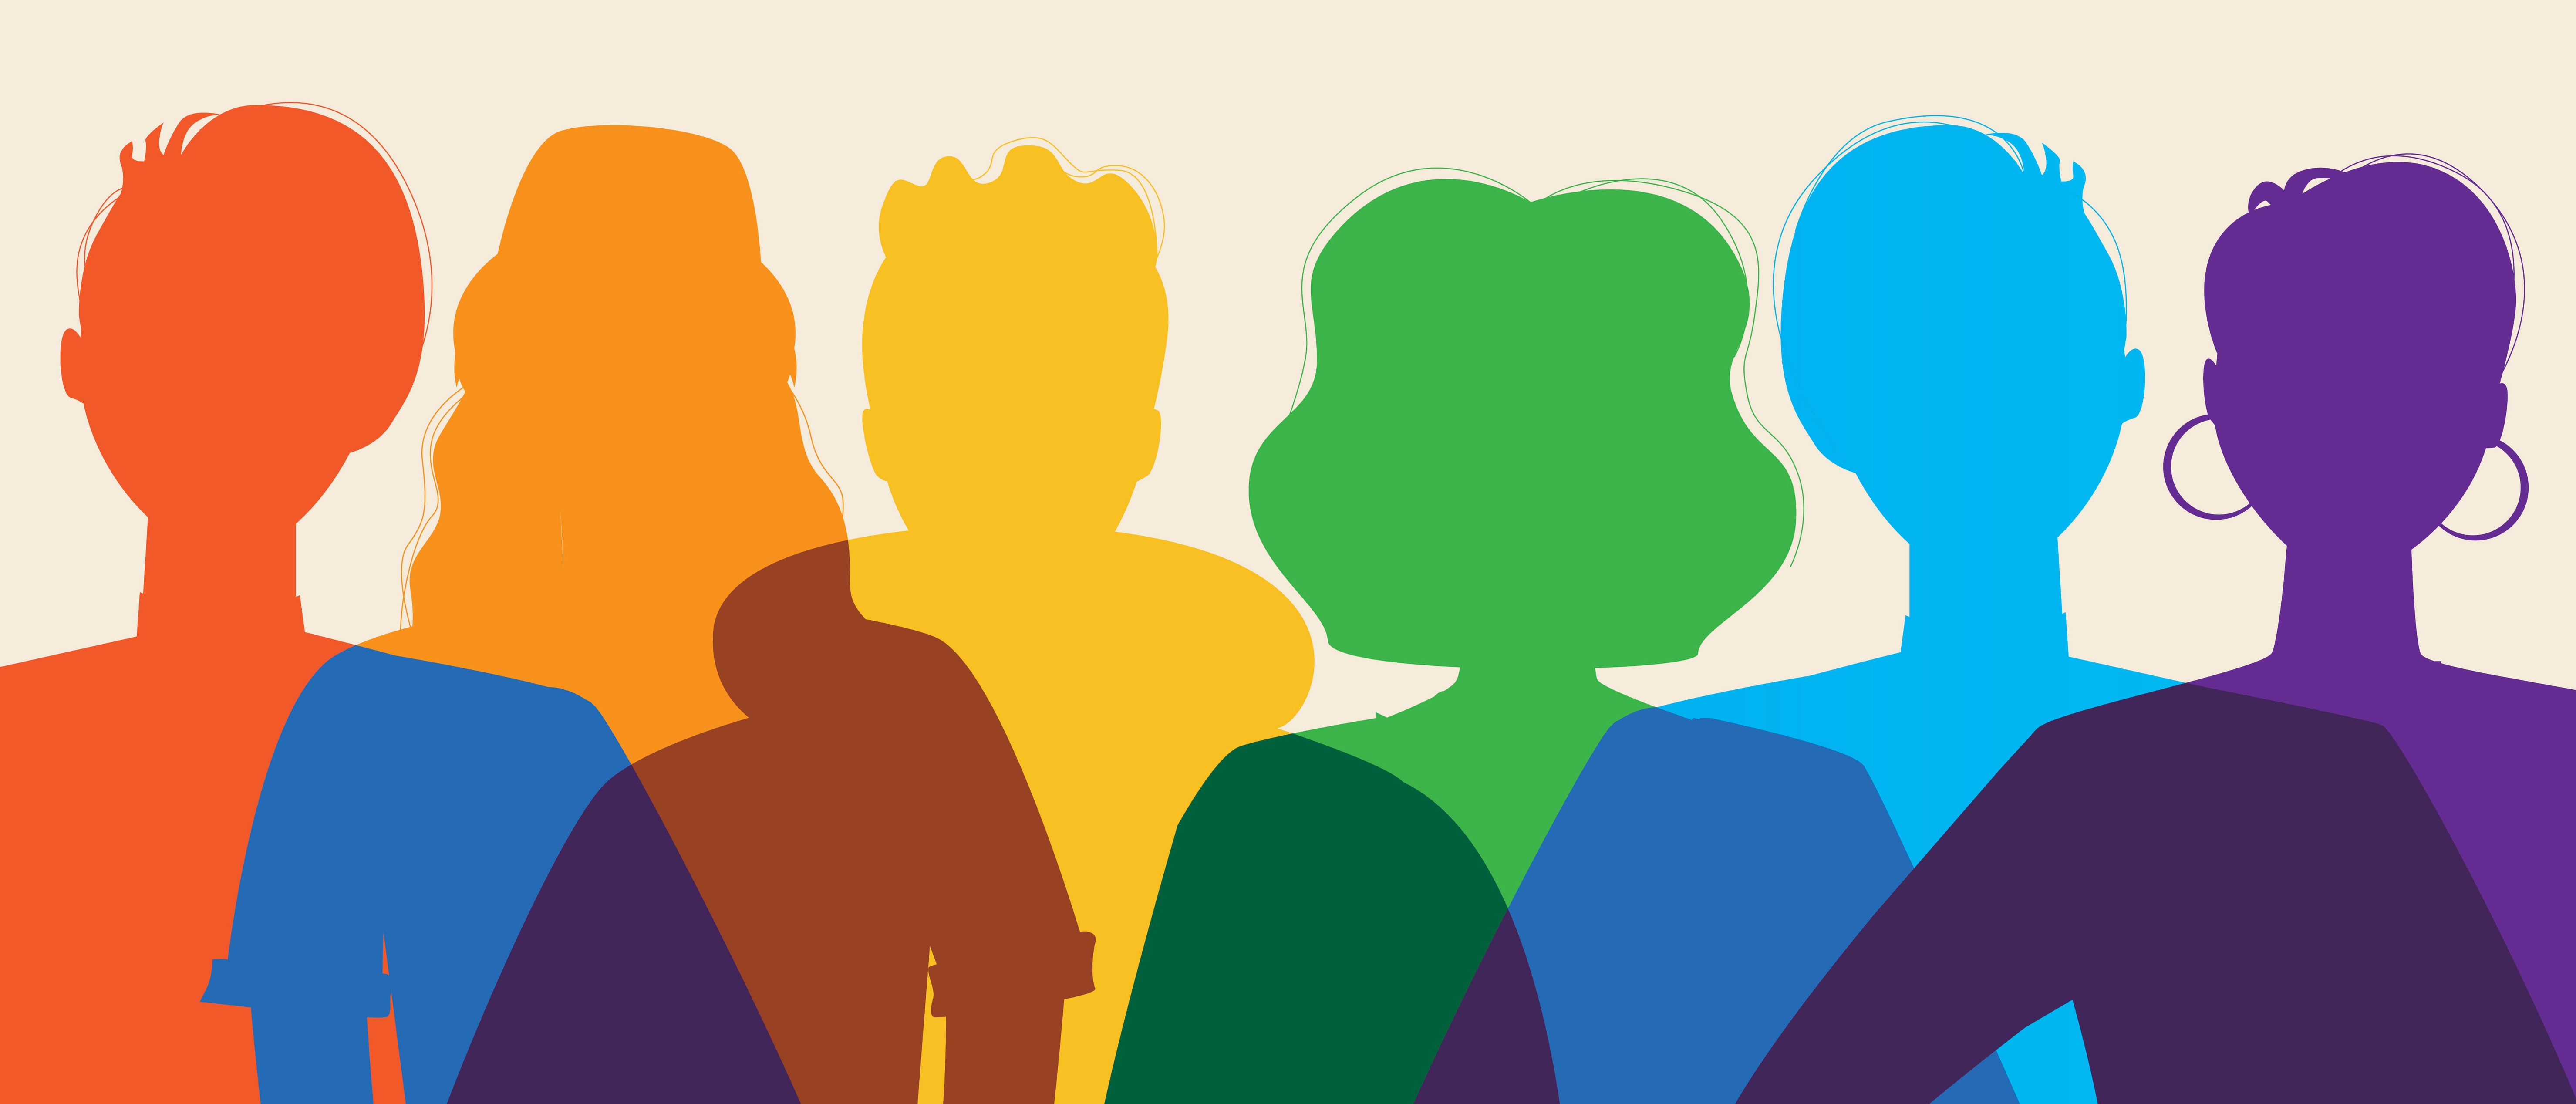 Group silhouette of LGBTQ+ people, pride concept | image credit: Vikkymir Store - stock.adobe.com